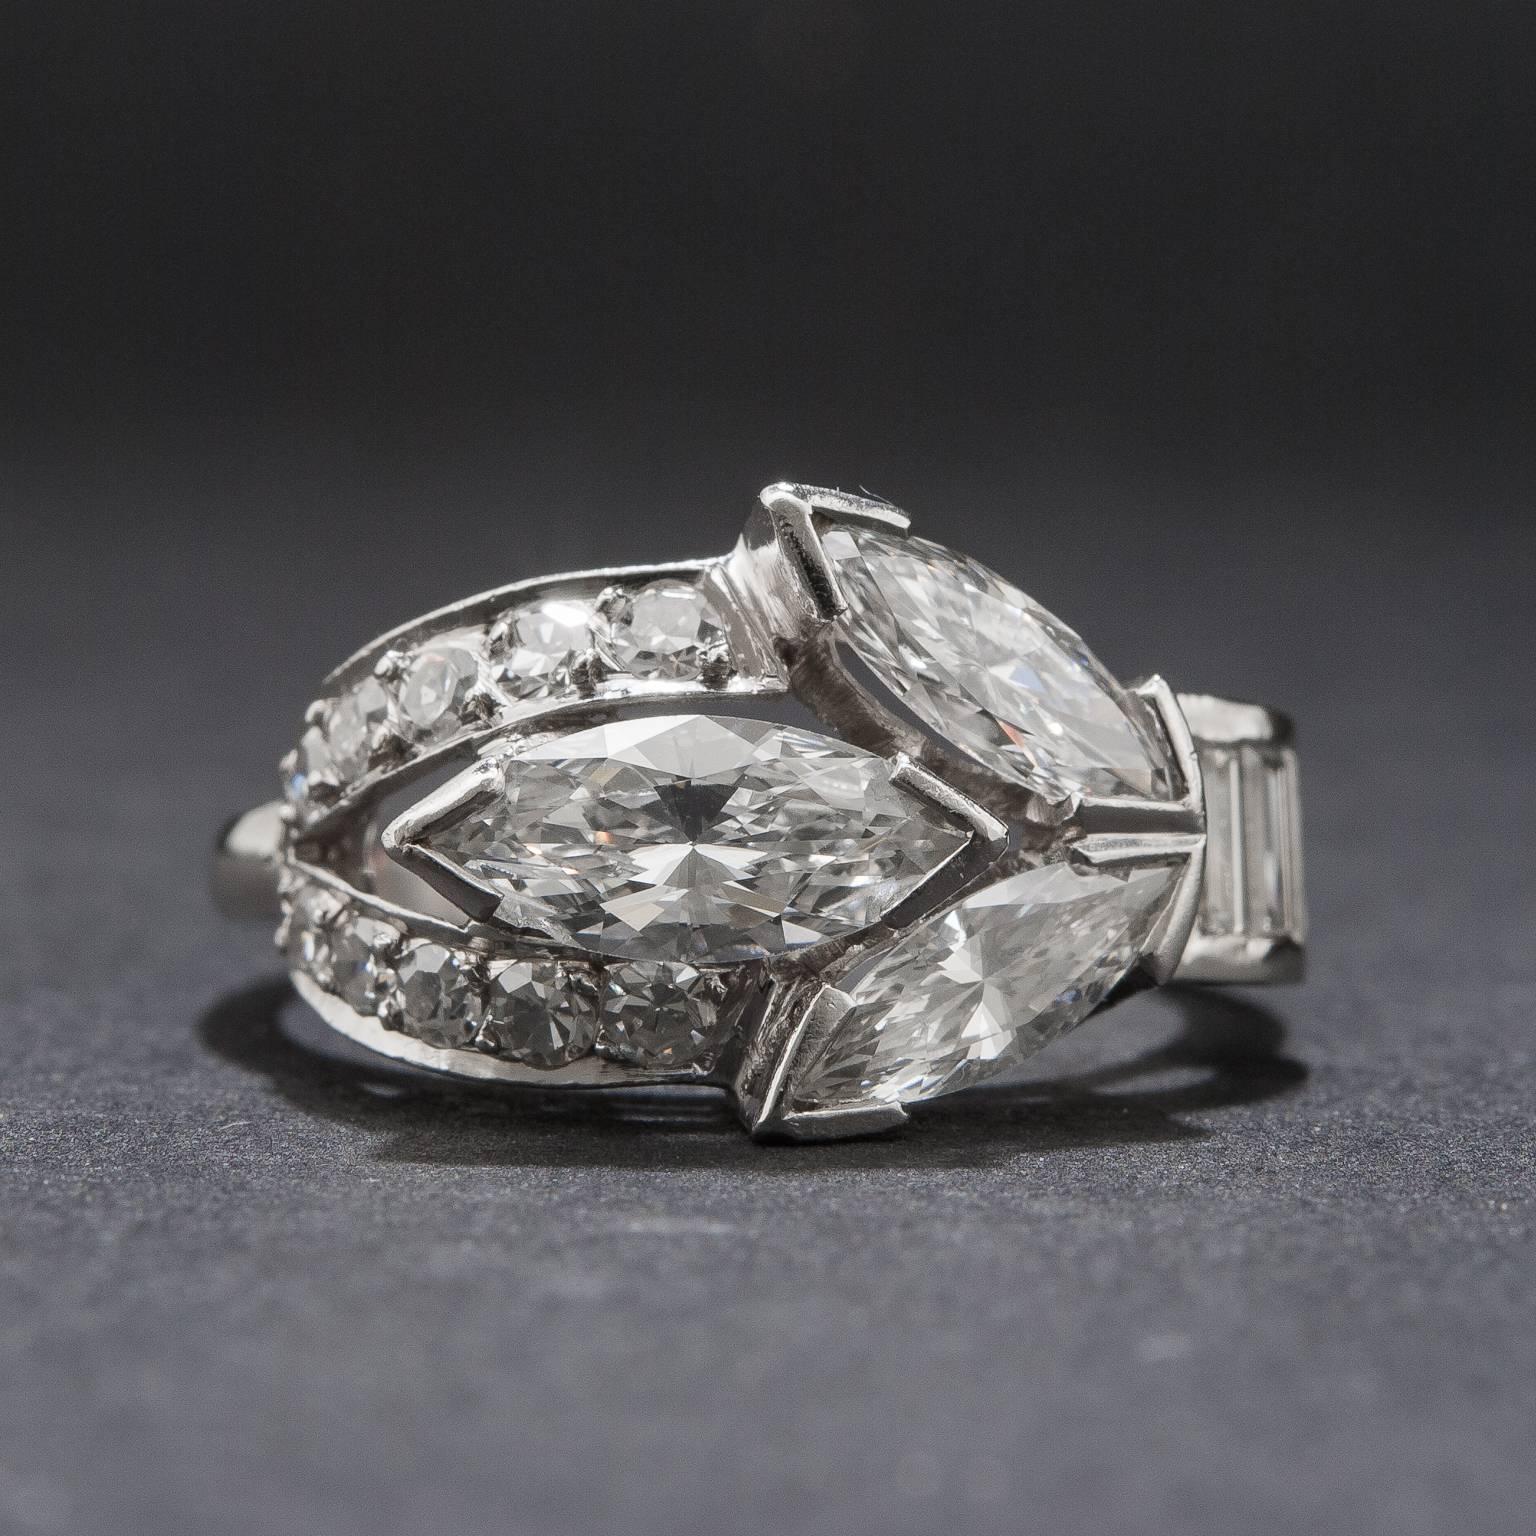 An extraordinary diamond ring crafted circa 1940s. This beautiful piece features a .70 carat center marquise cut diamond as well as two additional marquise cut diamonds for a total of .80 carats. The size 6.5 platinum mounting also includes an